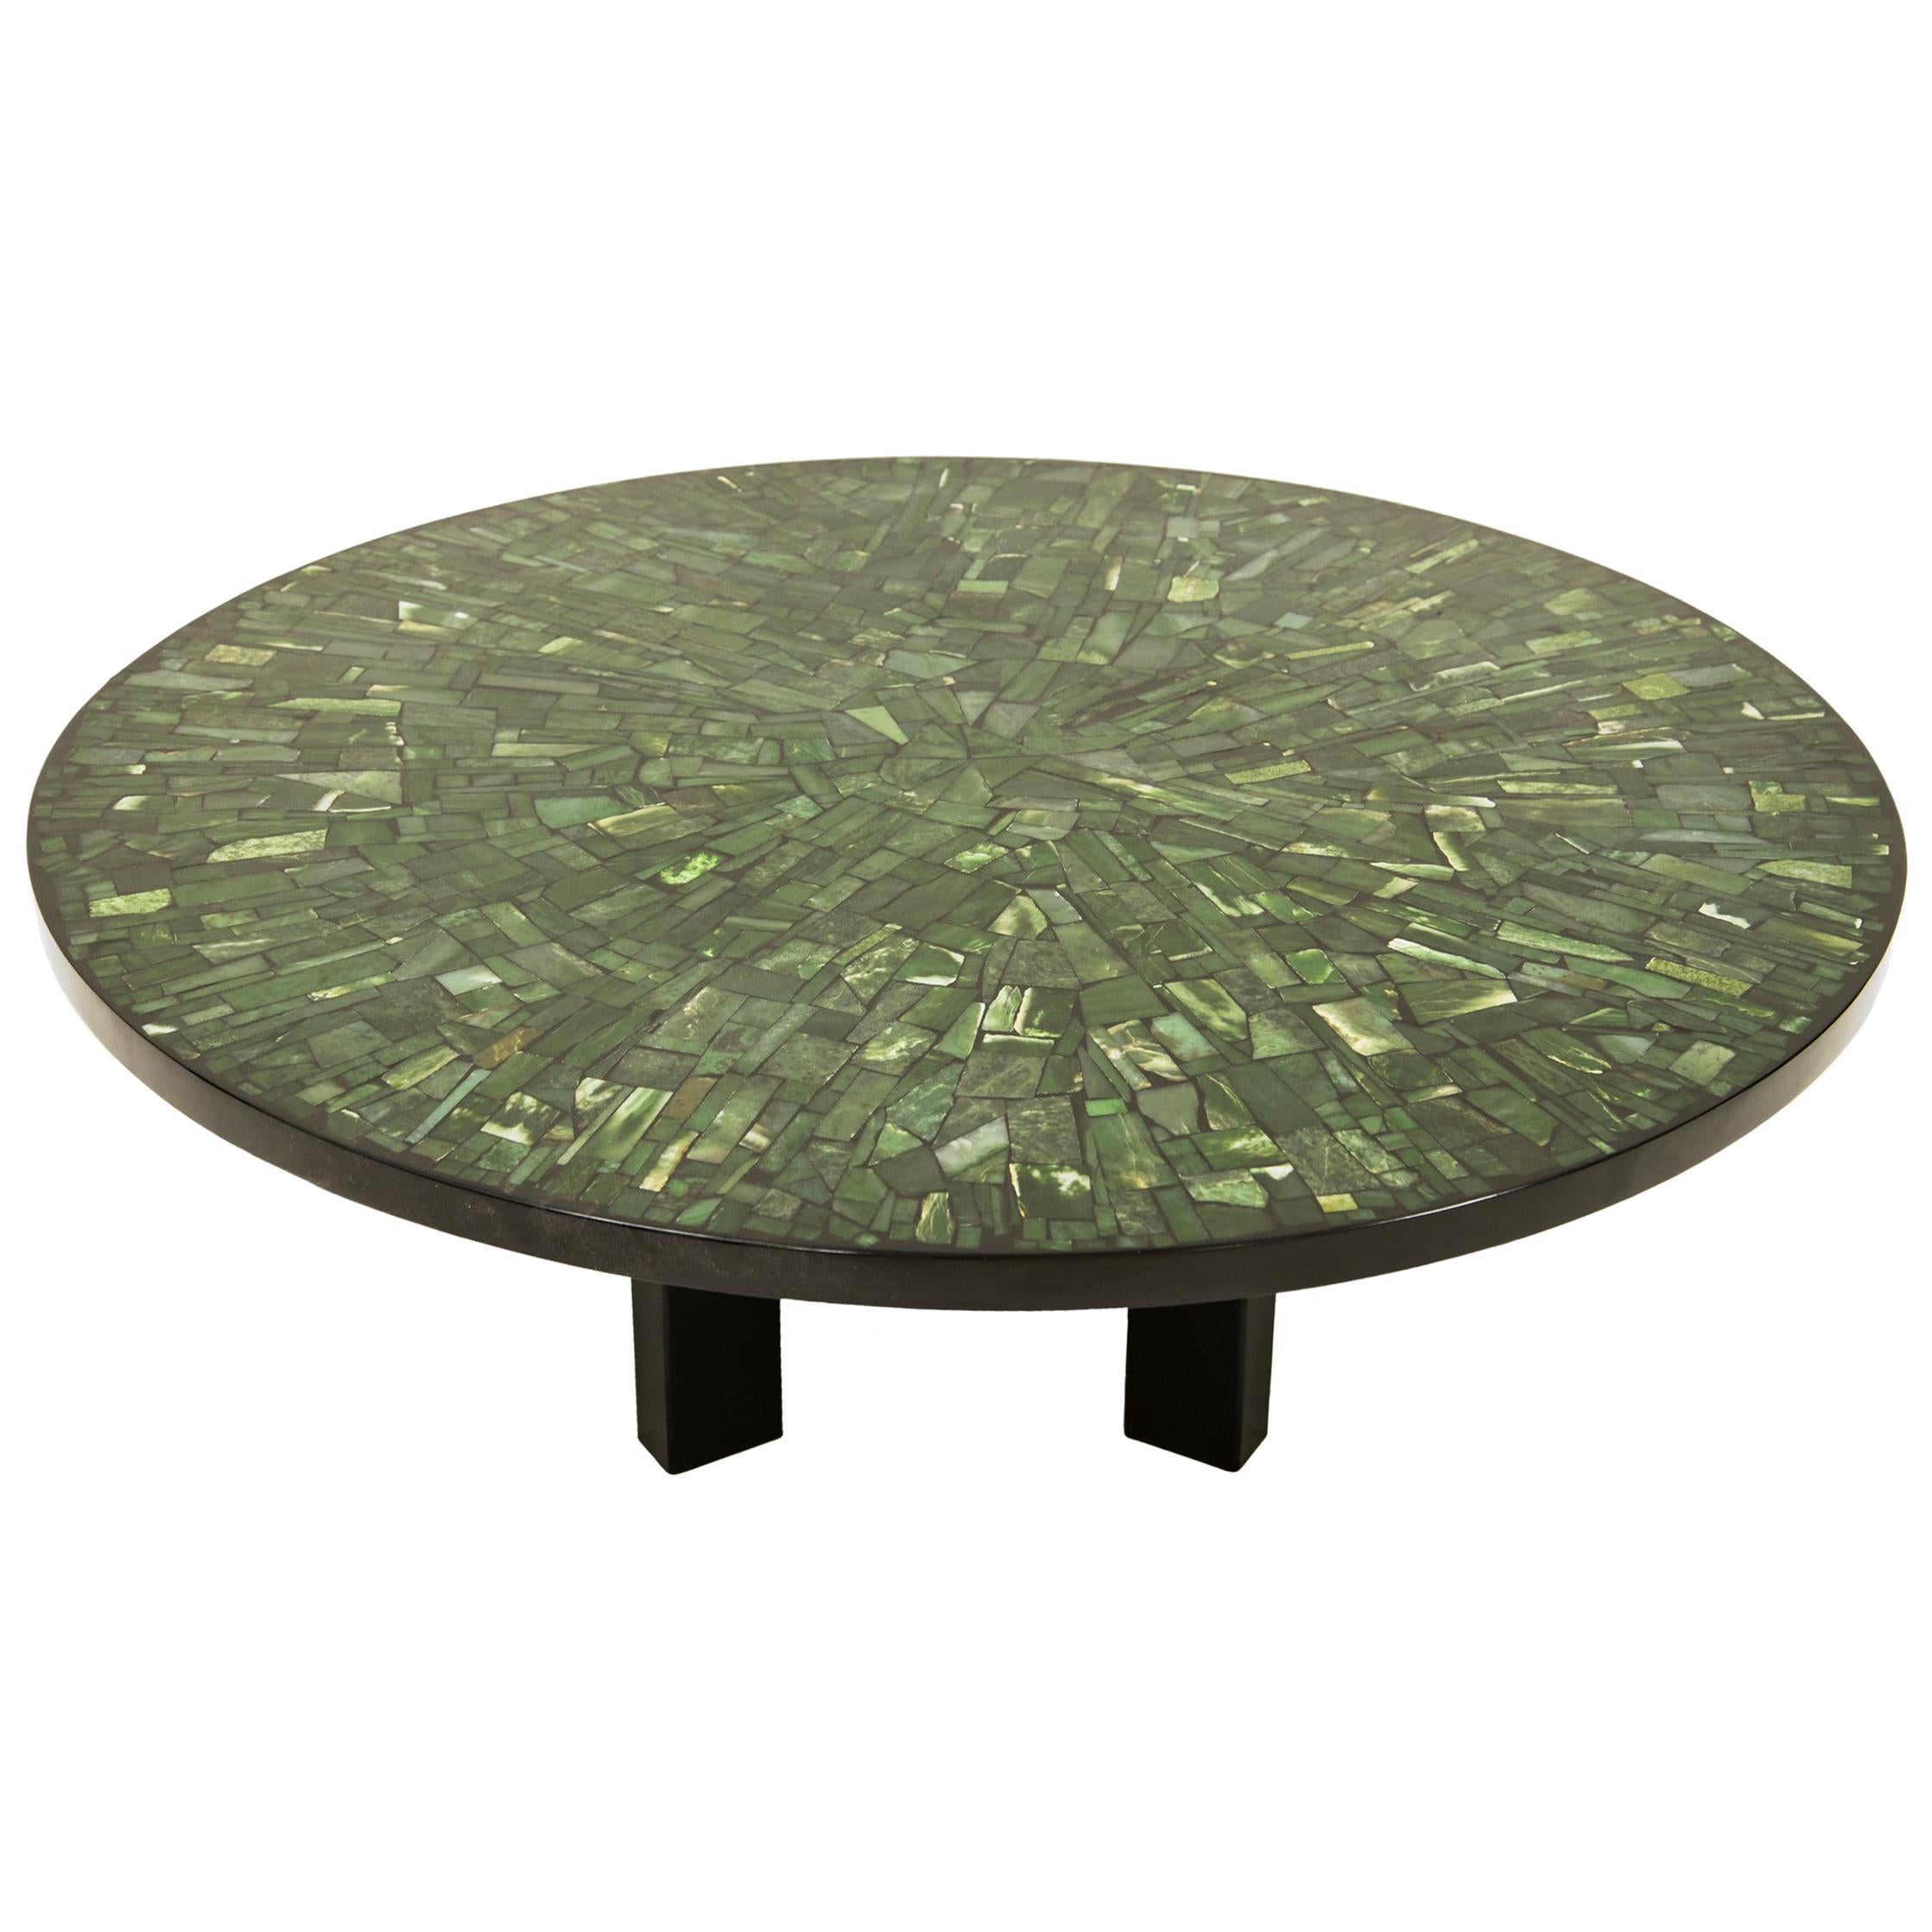 Etienne Allemeerch, Coffee Table in Resin with Jade Inclusions, circa 1975